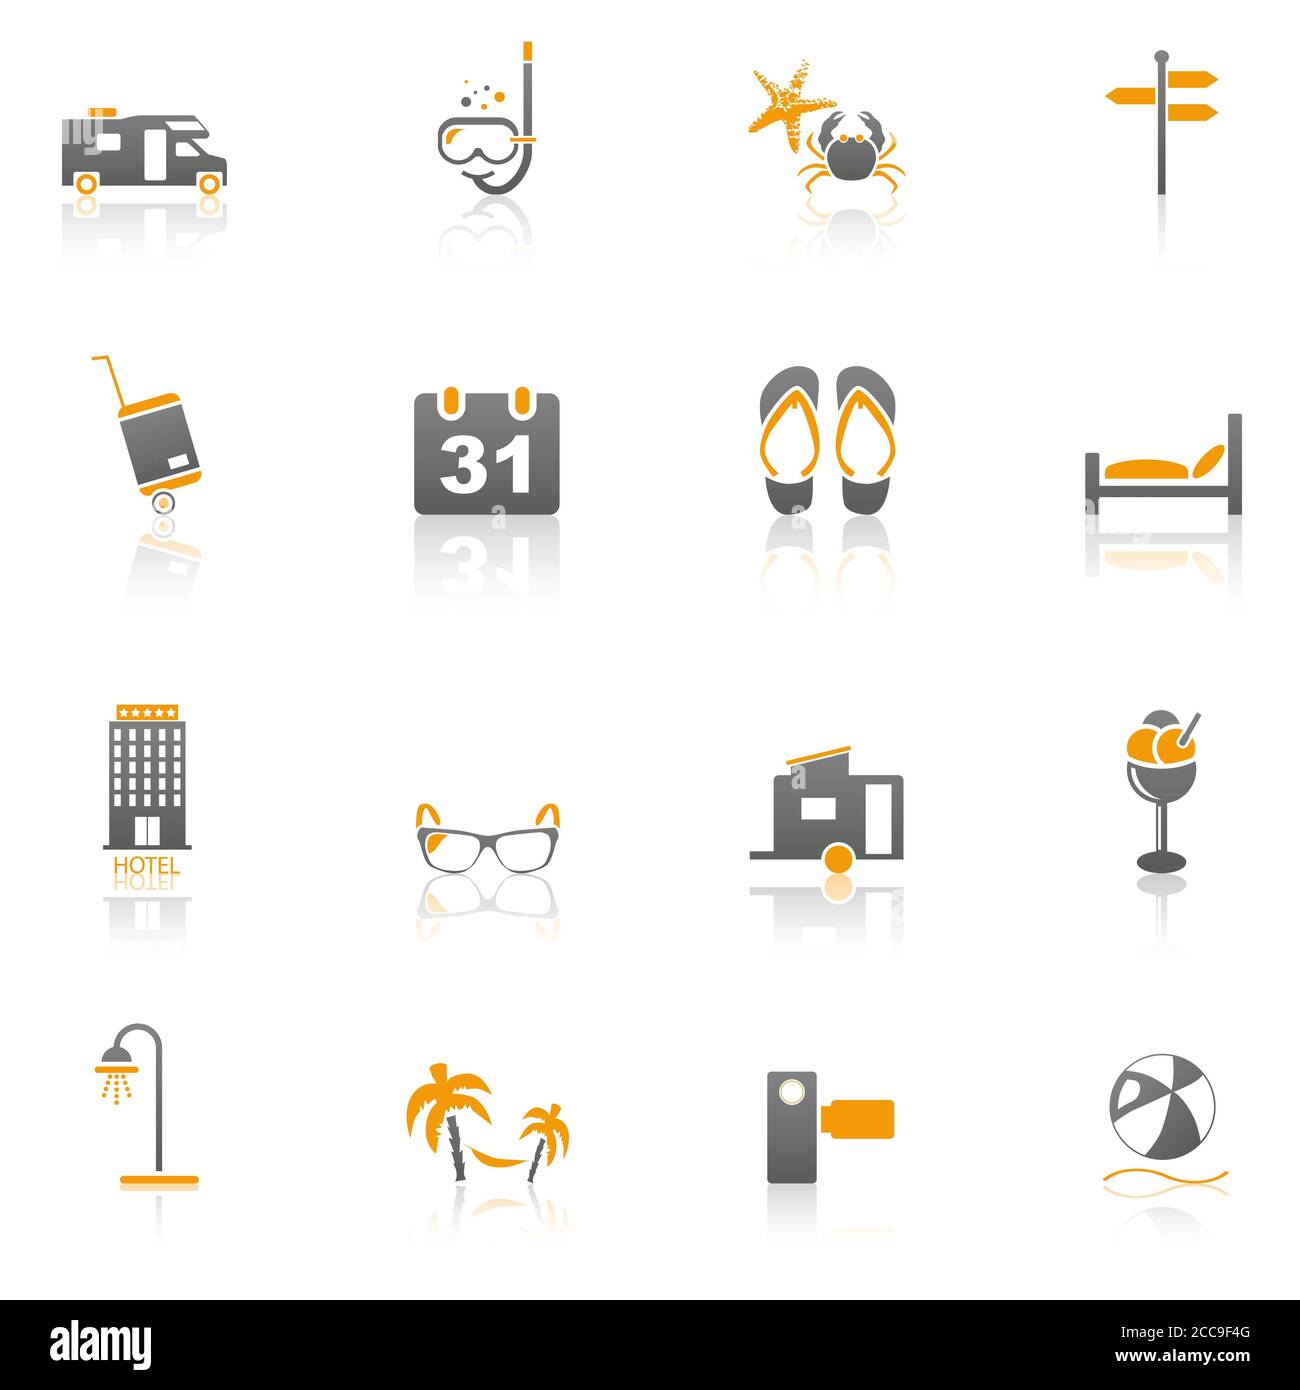 Illustration of travel icon clip arts - concept for symbols used as signs on hotels and resorts Stock Photo